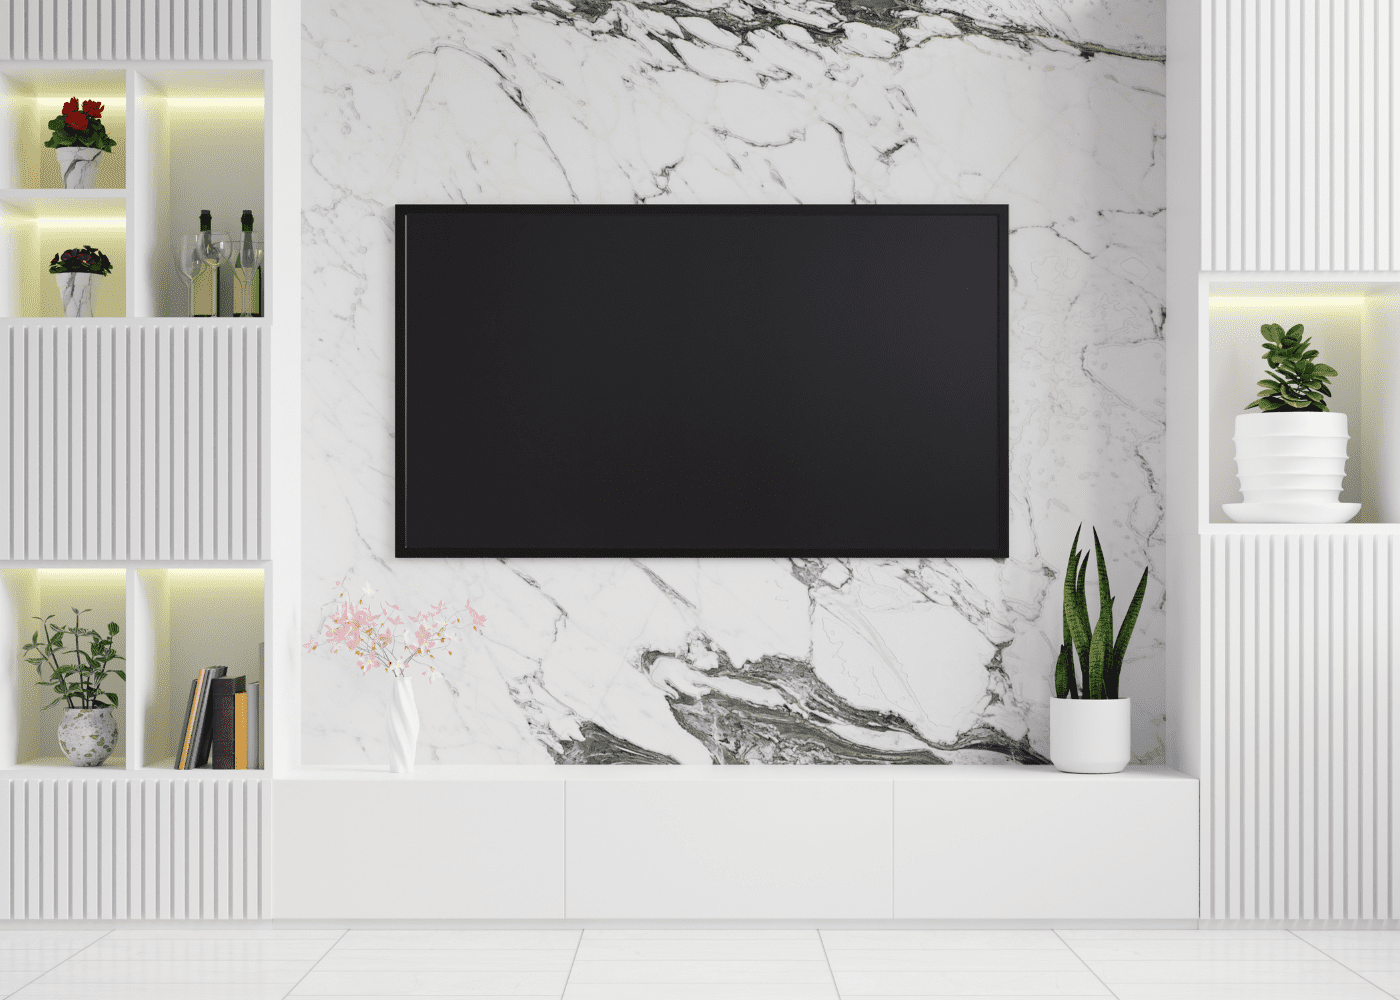 Black tv mounted on a marble wall.